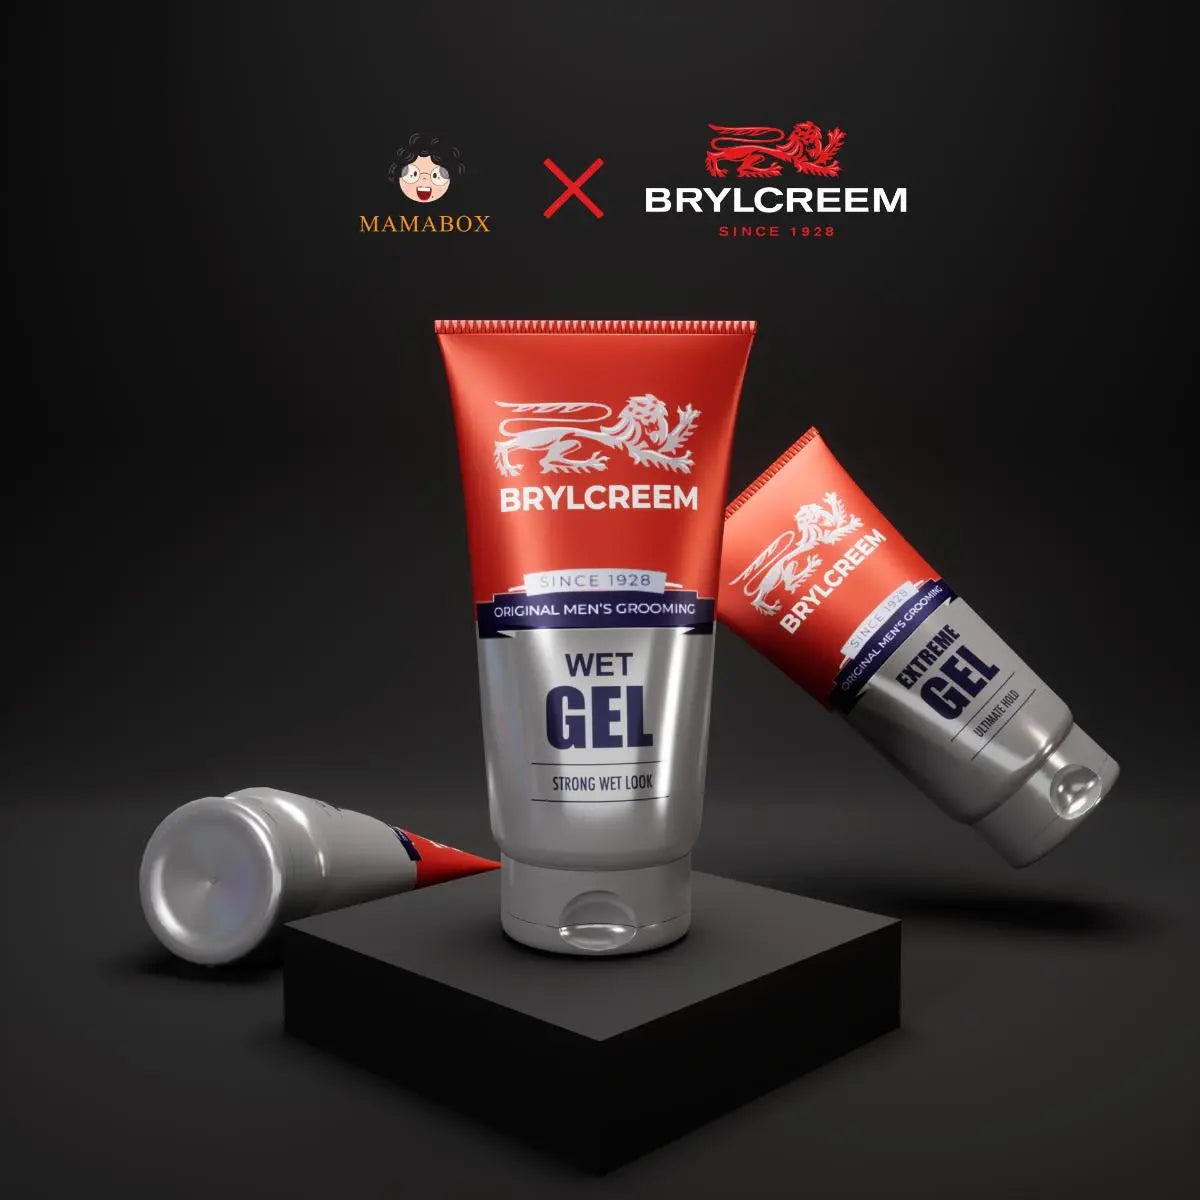 Brylcreem Style Wet Look/Extreme Gel 150ml x 2 - mamabox.sg